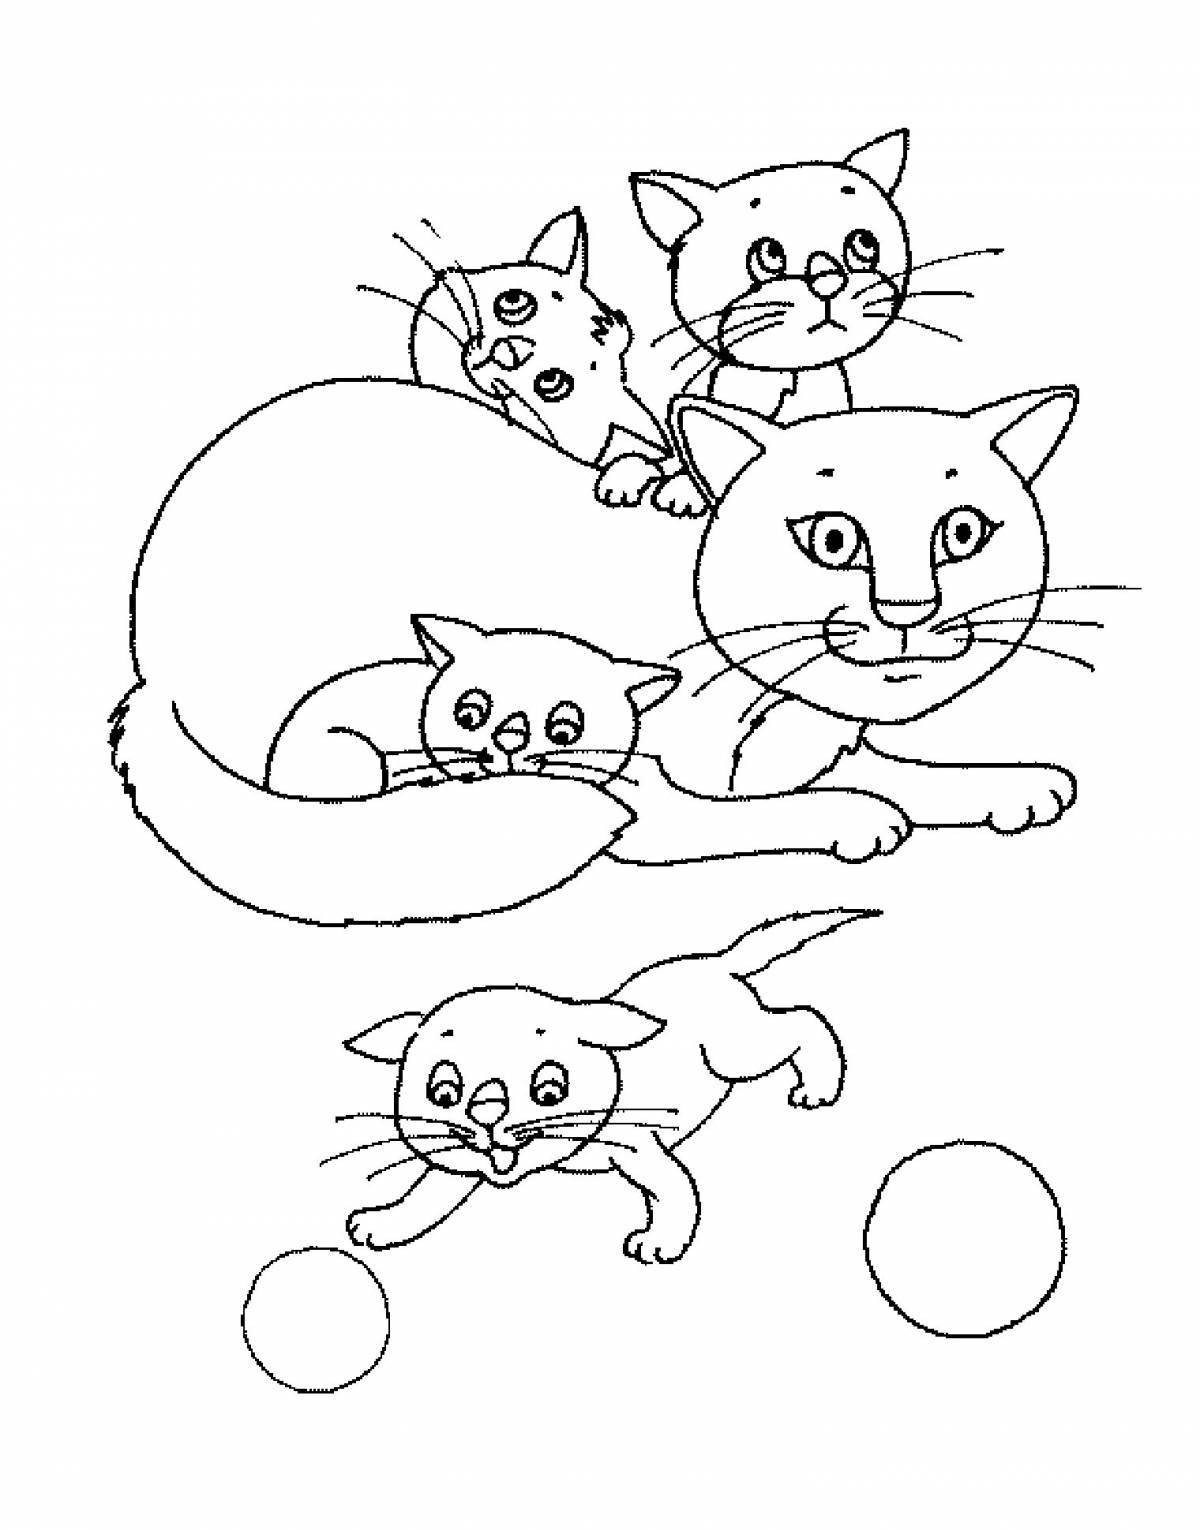 Coloring book smiling family of cats